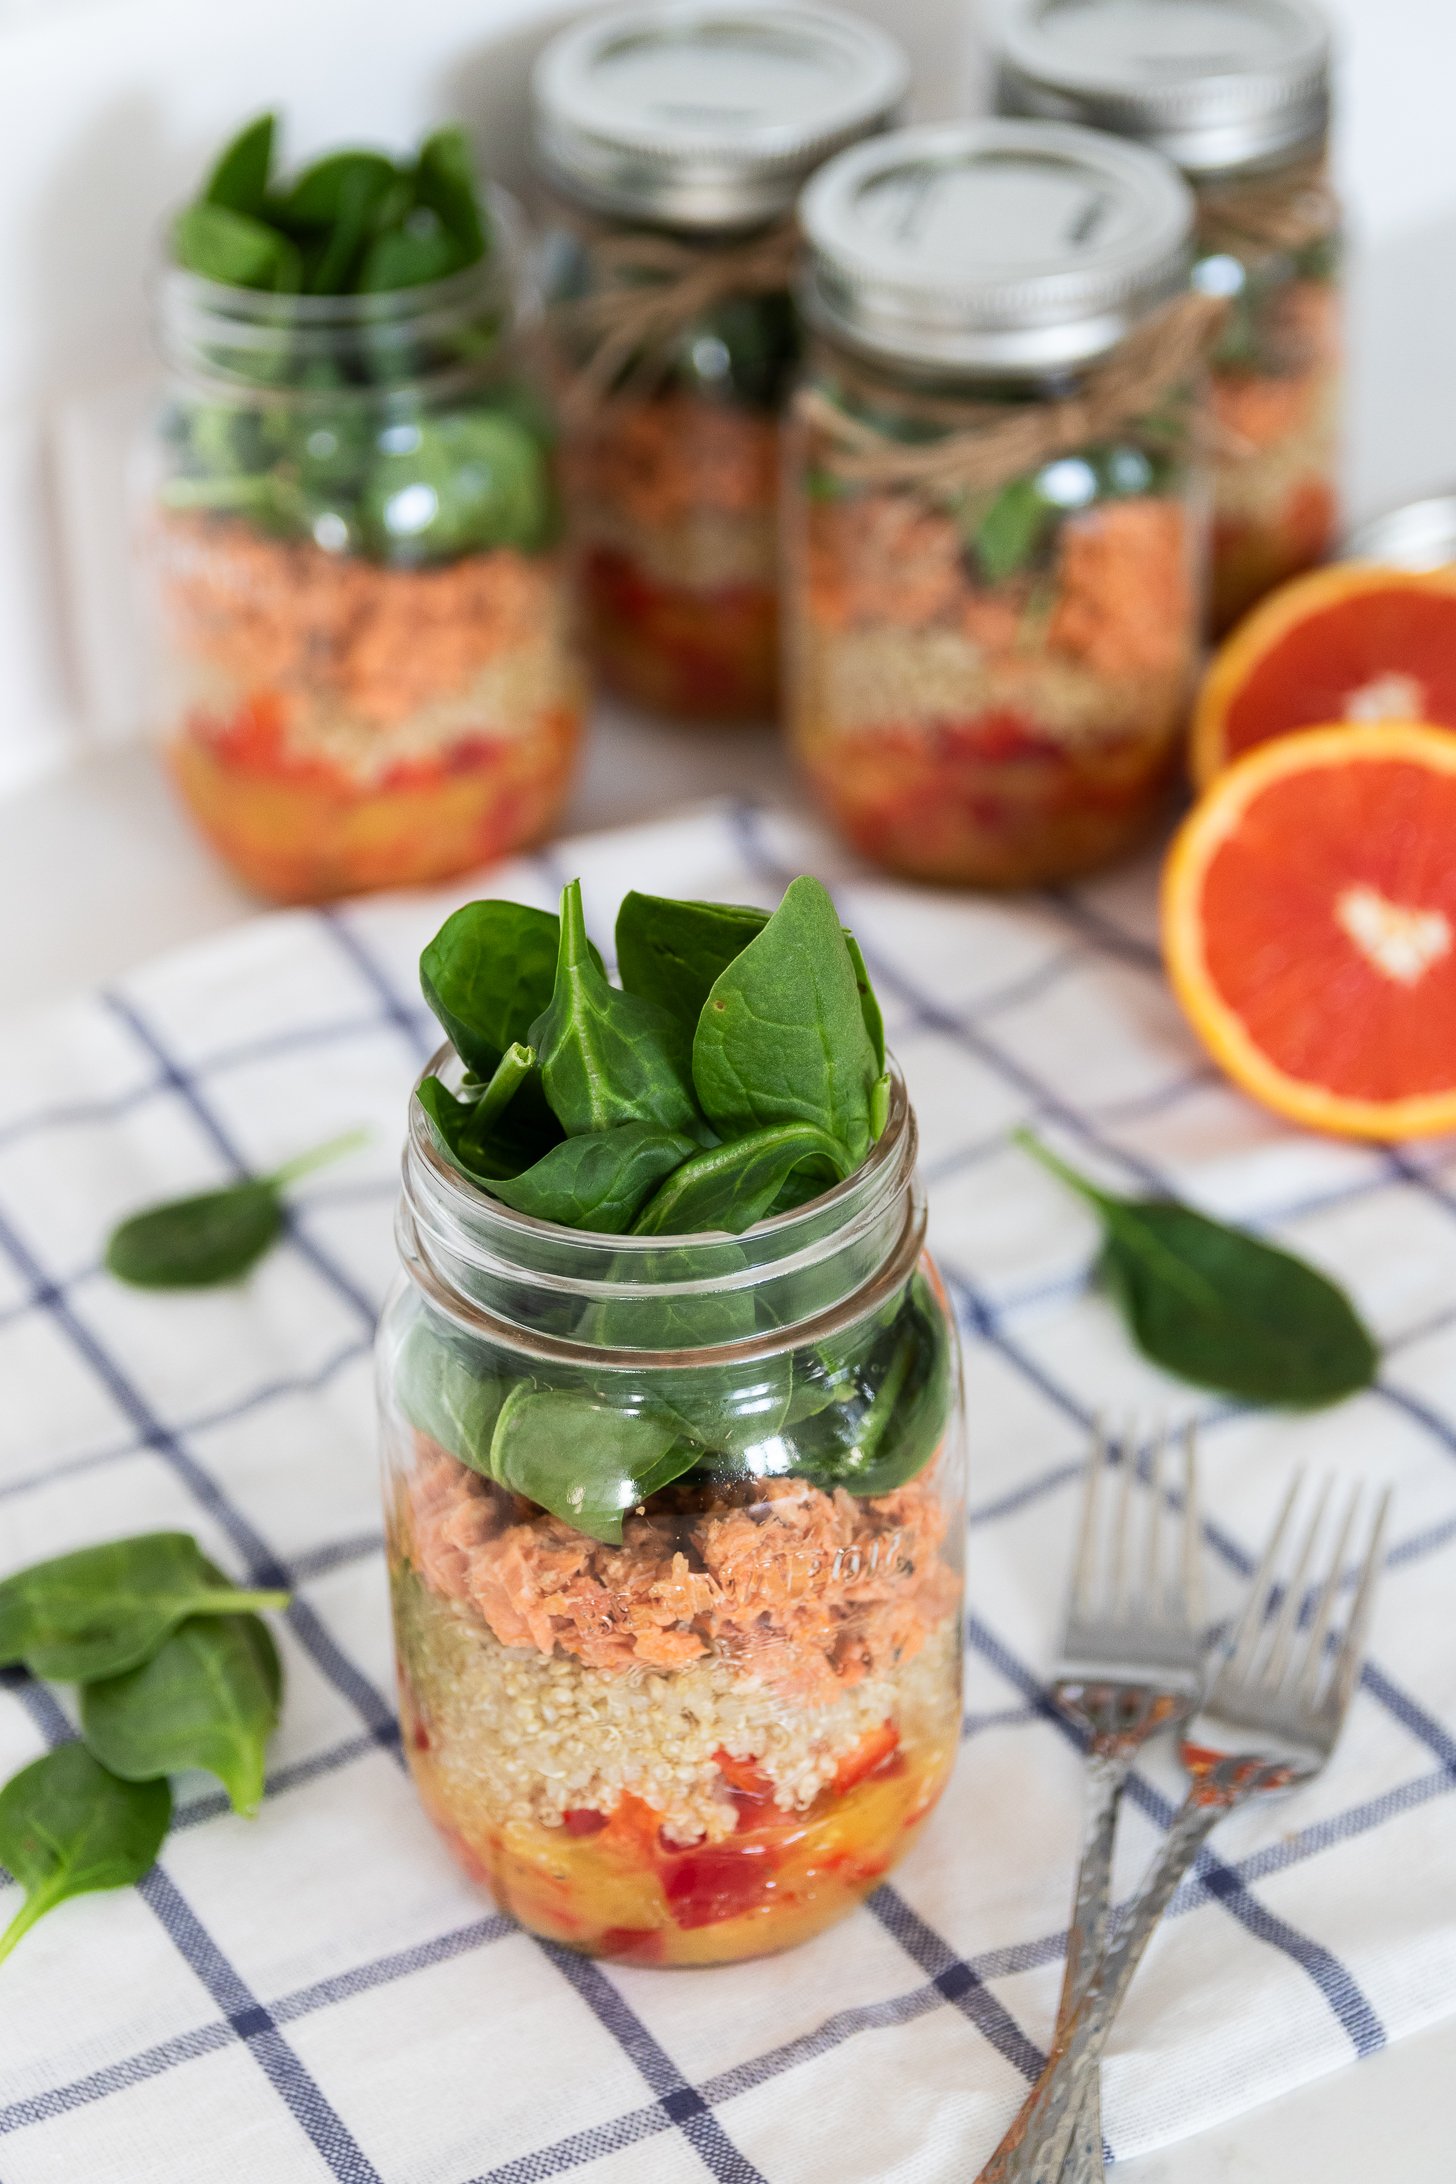 A perspective image of five colourful layered mason jar salads with peppers, quinoa, canned salmon, and spinach leaves on top, creating a vibrant salad.